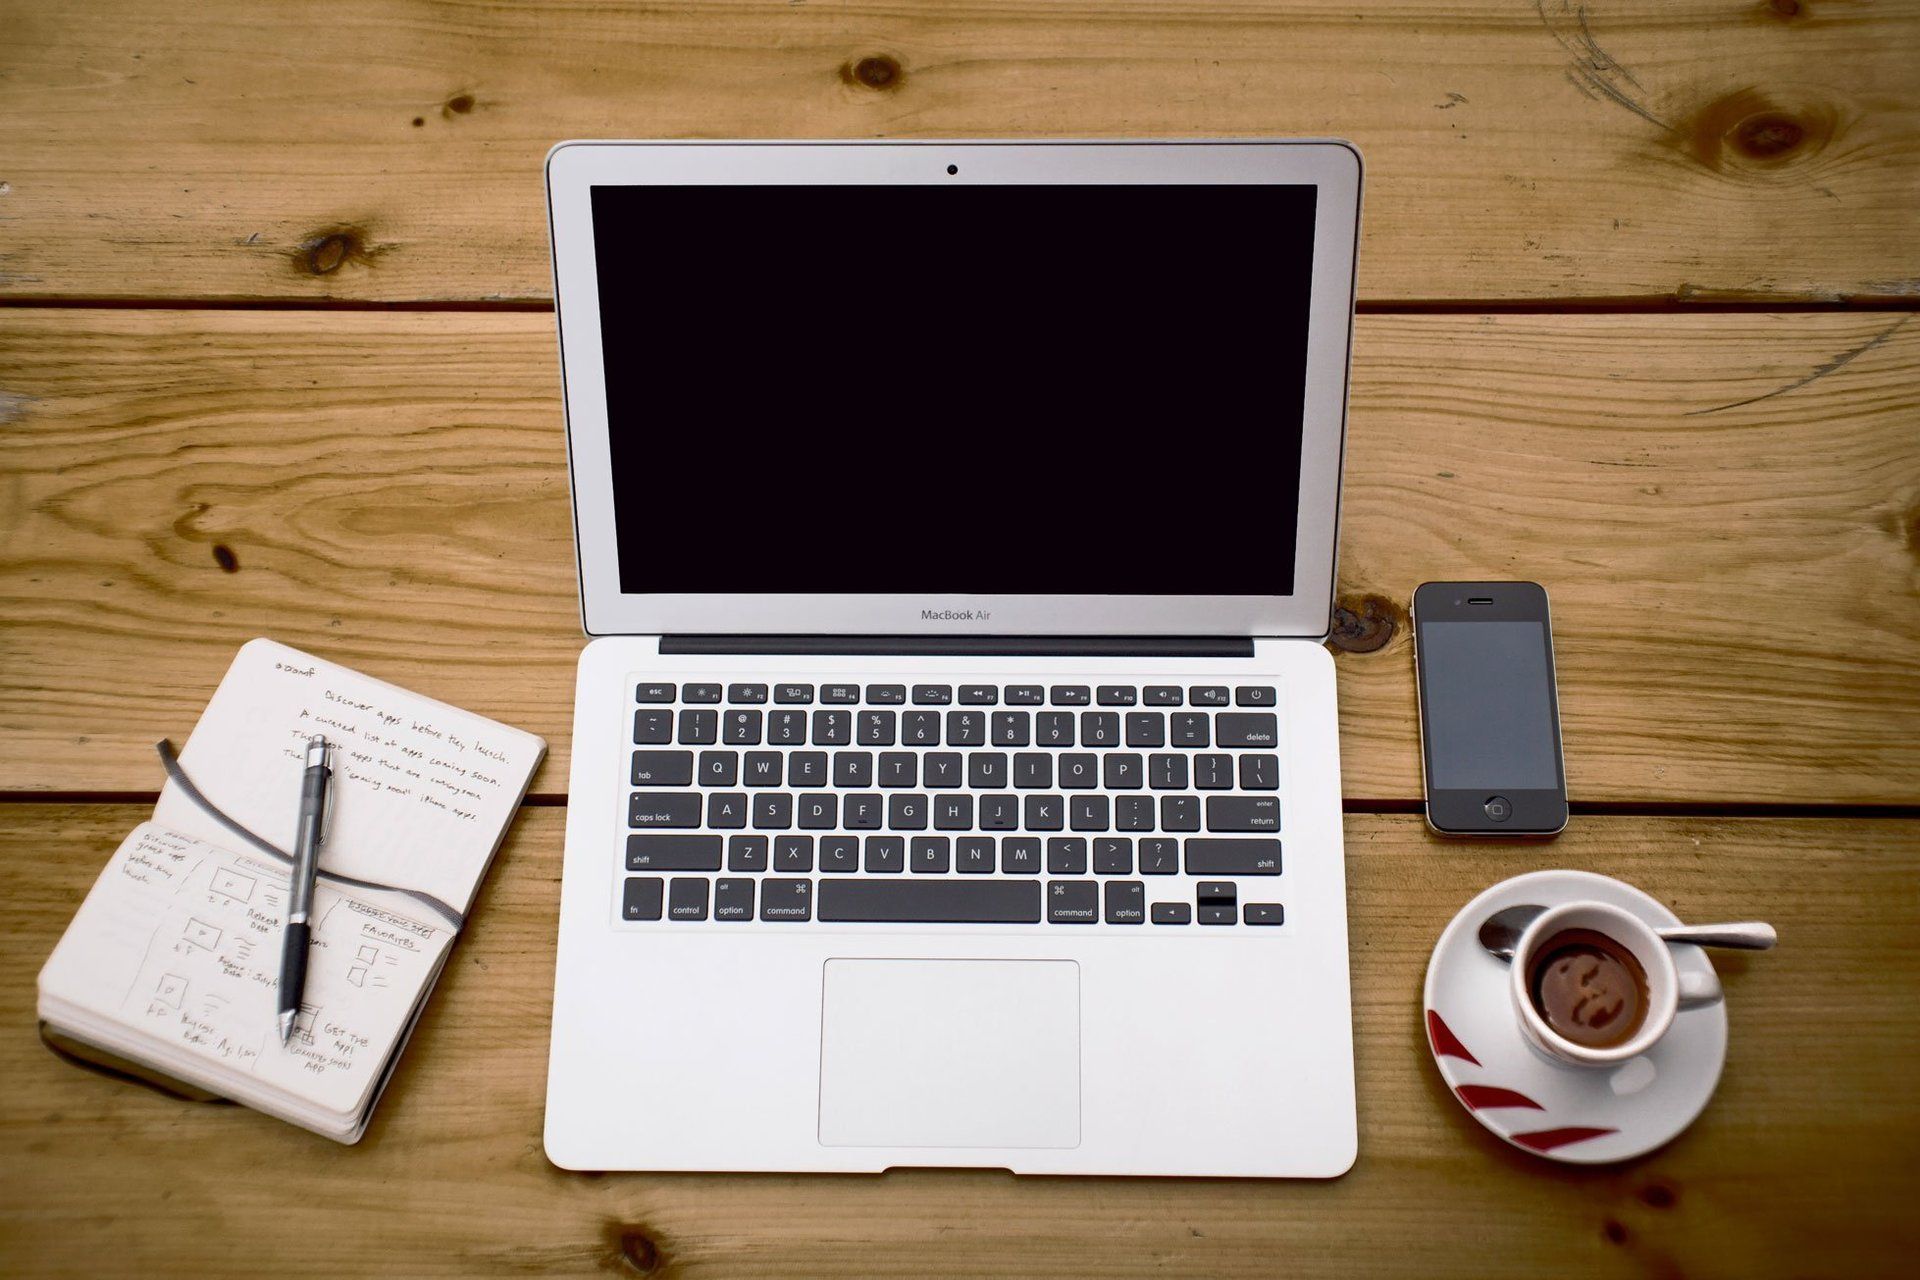 Laptop on table with a pen and paper on the left and a mobile phone and cup of coffee on the right